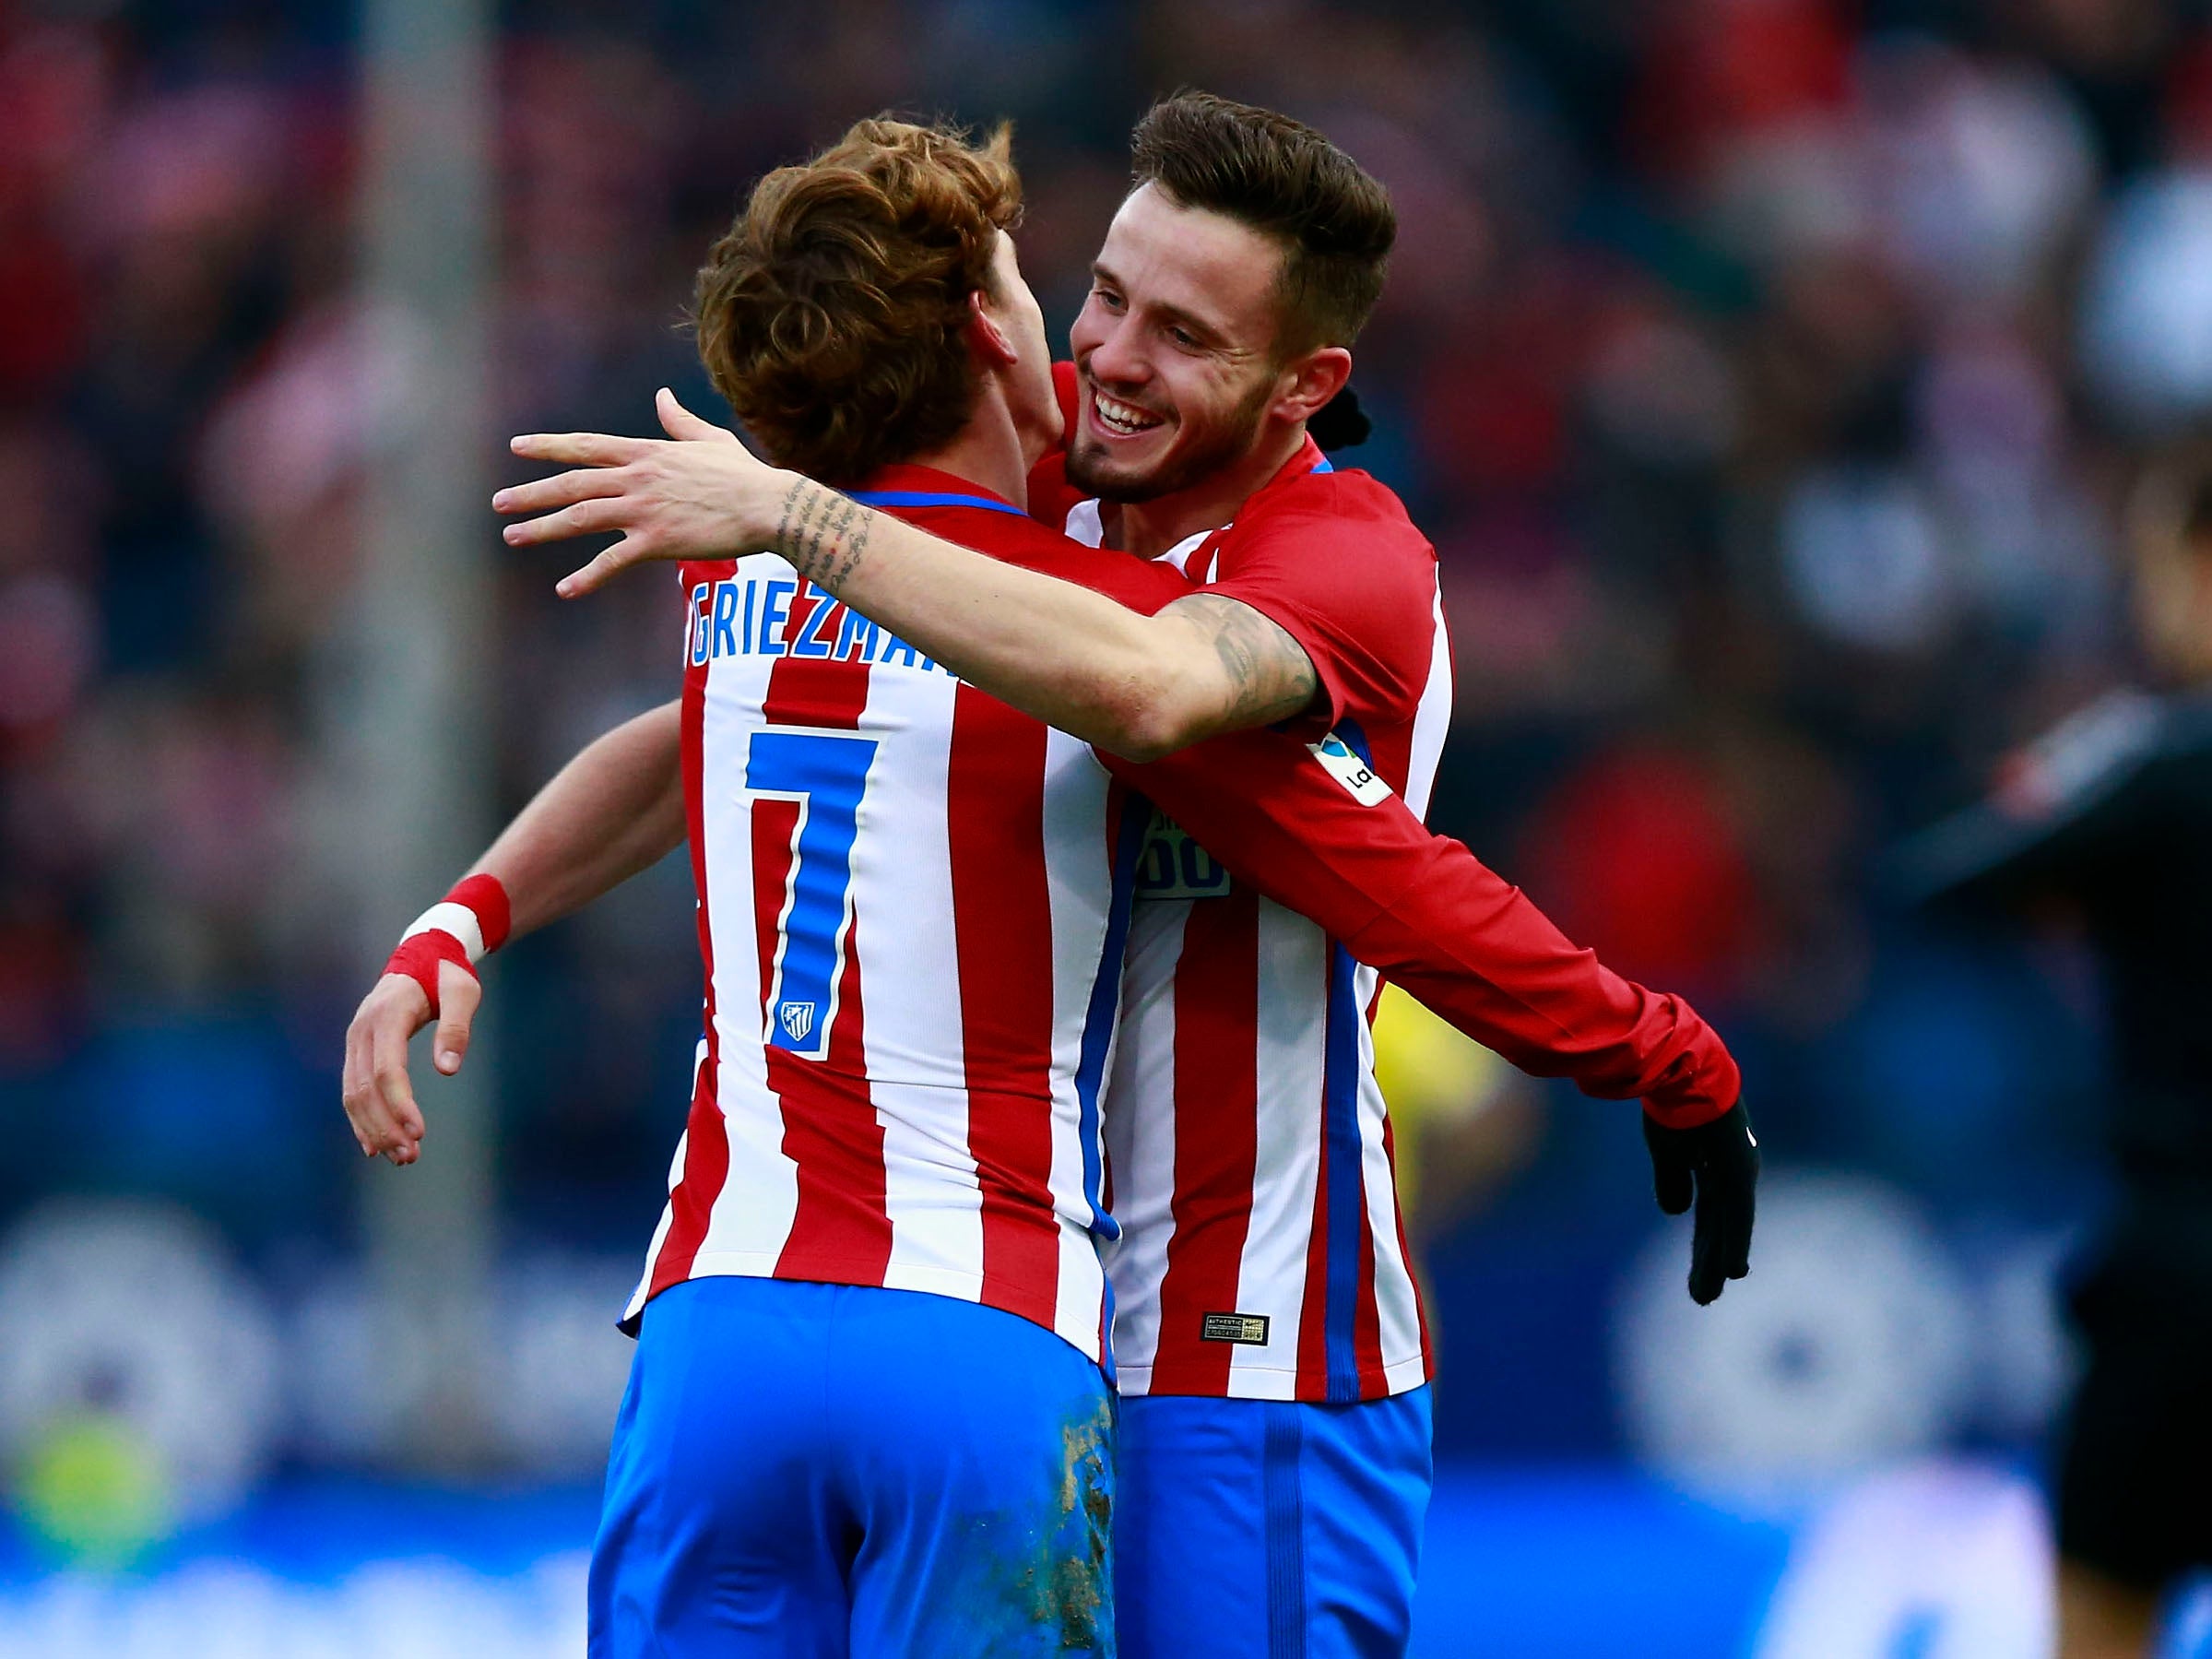 Griezmann and Saúl Niguez may need to be sold to fill a financial black hole at Atletico